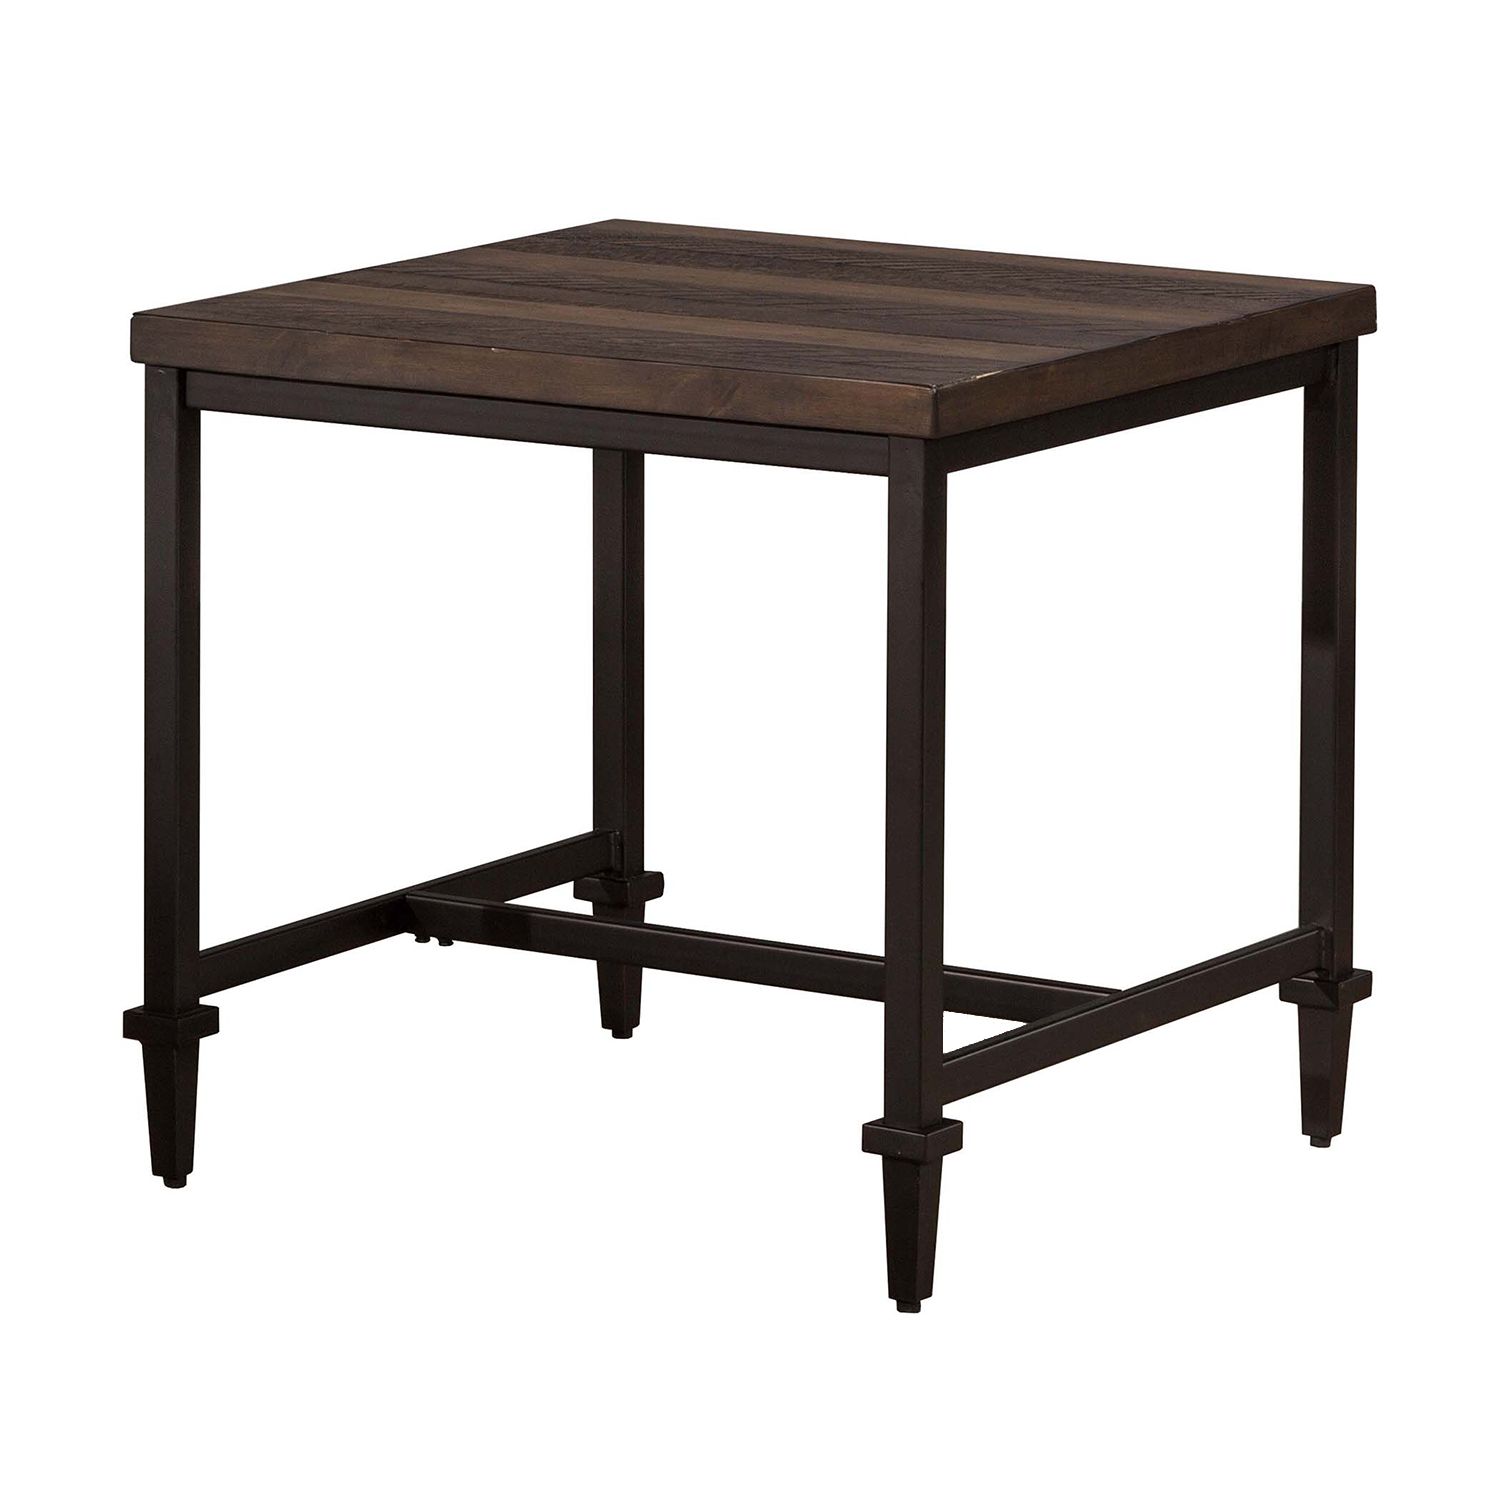 Image for Hillsdale Furniture Trevino End Table at Kohl's.